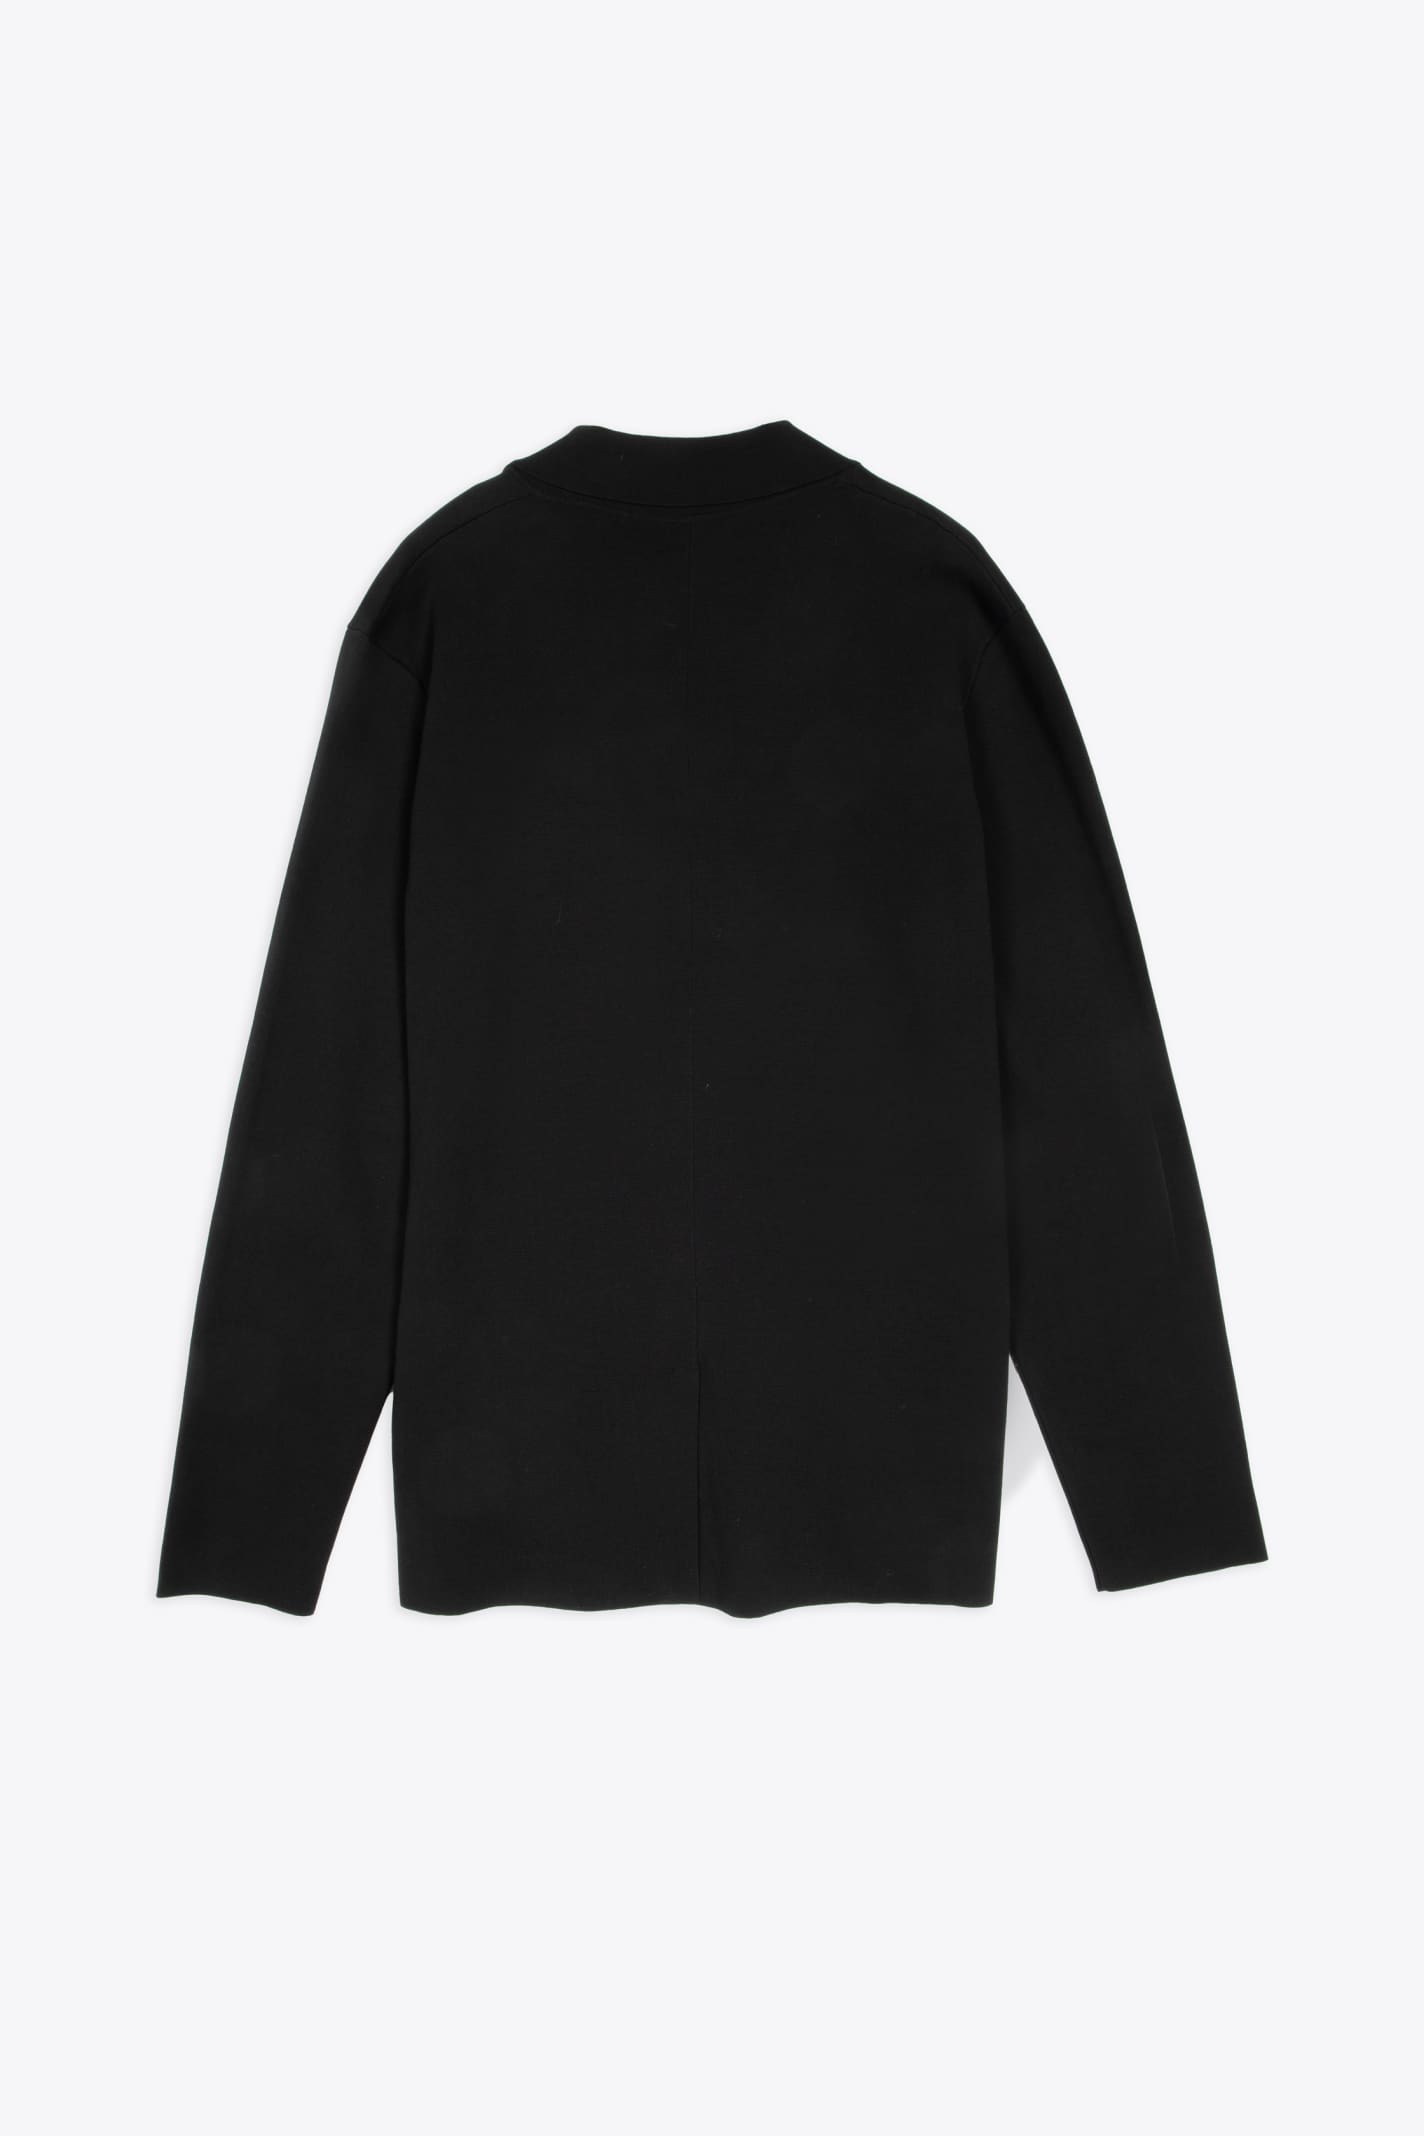 Shop Roberto Collina Giacca Revers Black Cotton Knit Blazer With Patch Pockets In Nero